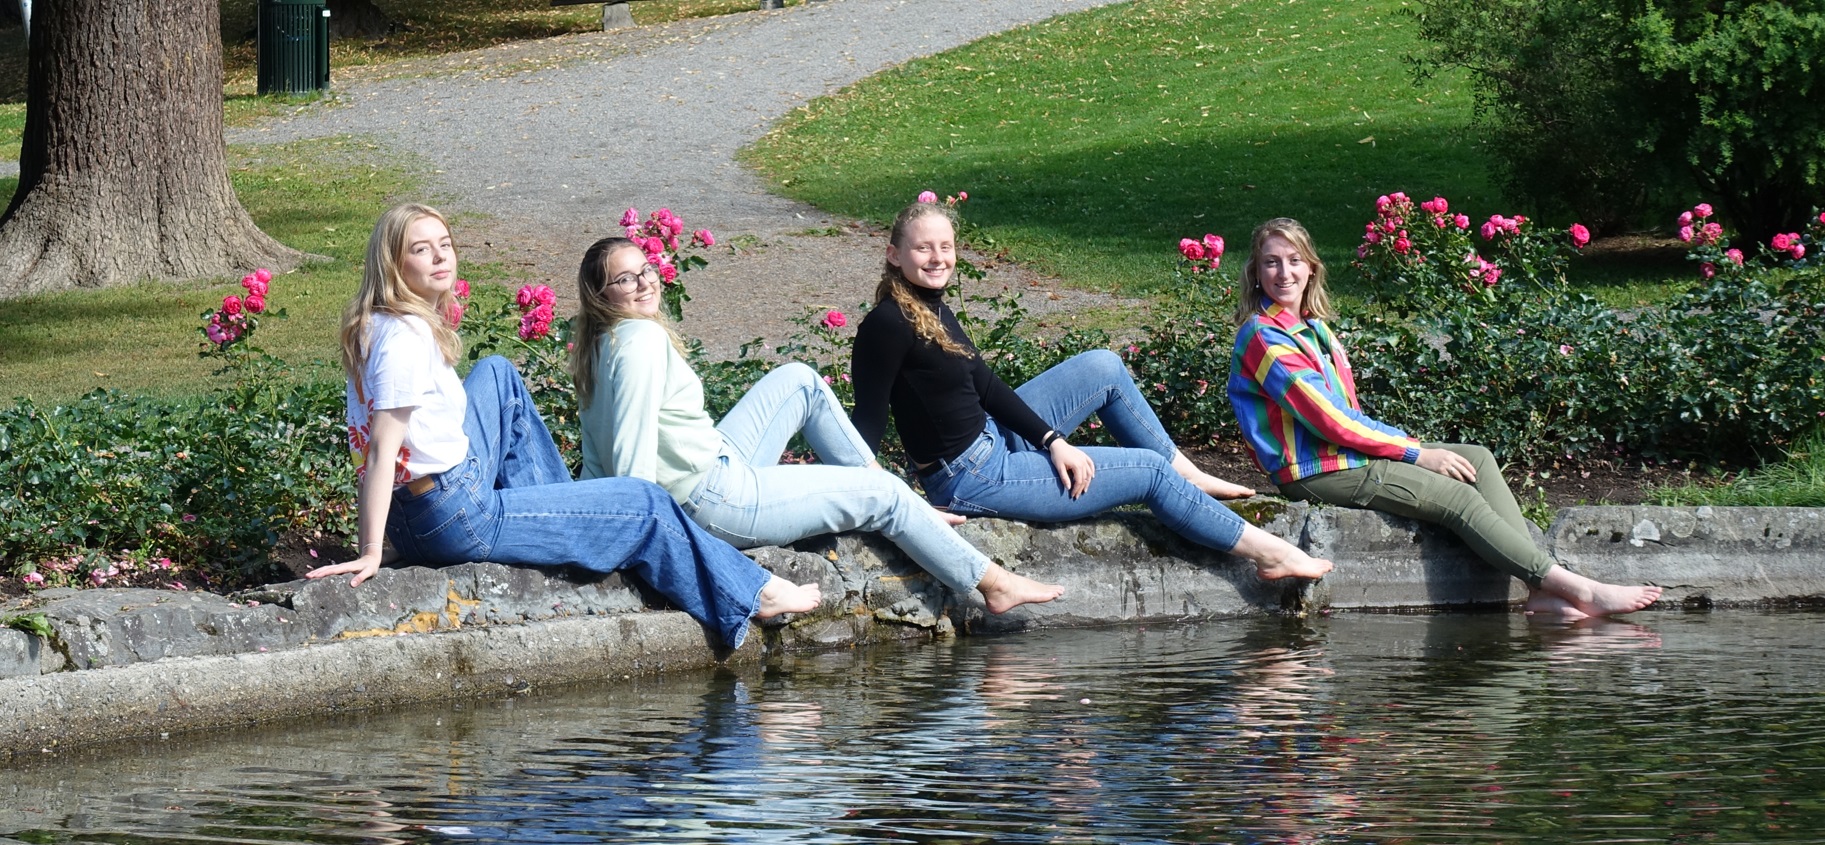 Female exchange students sitting at the pond in the sun with pink roses in the background